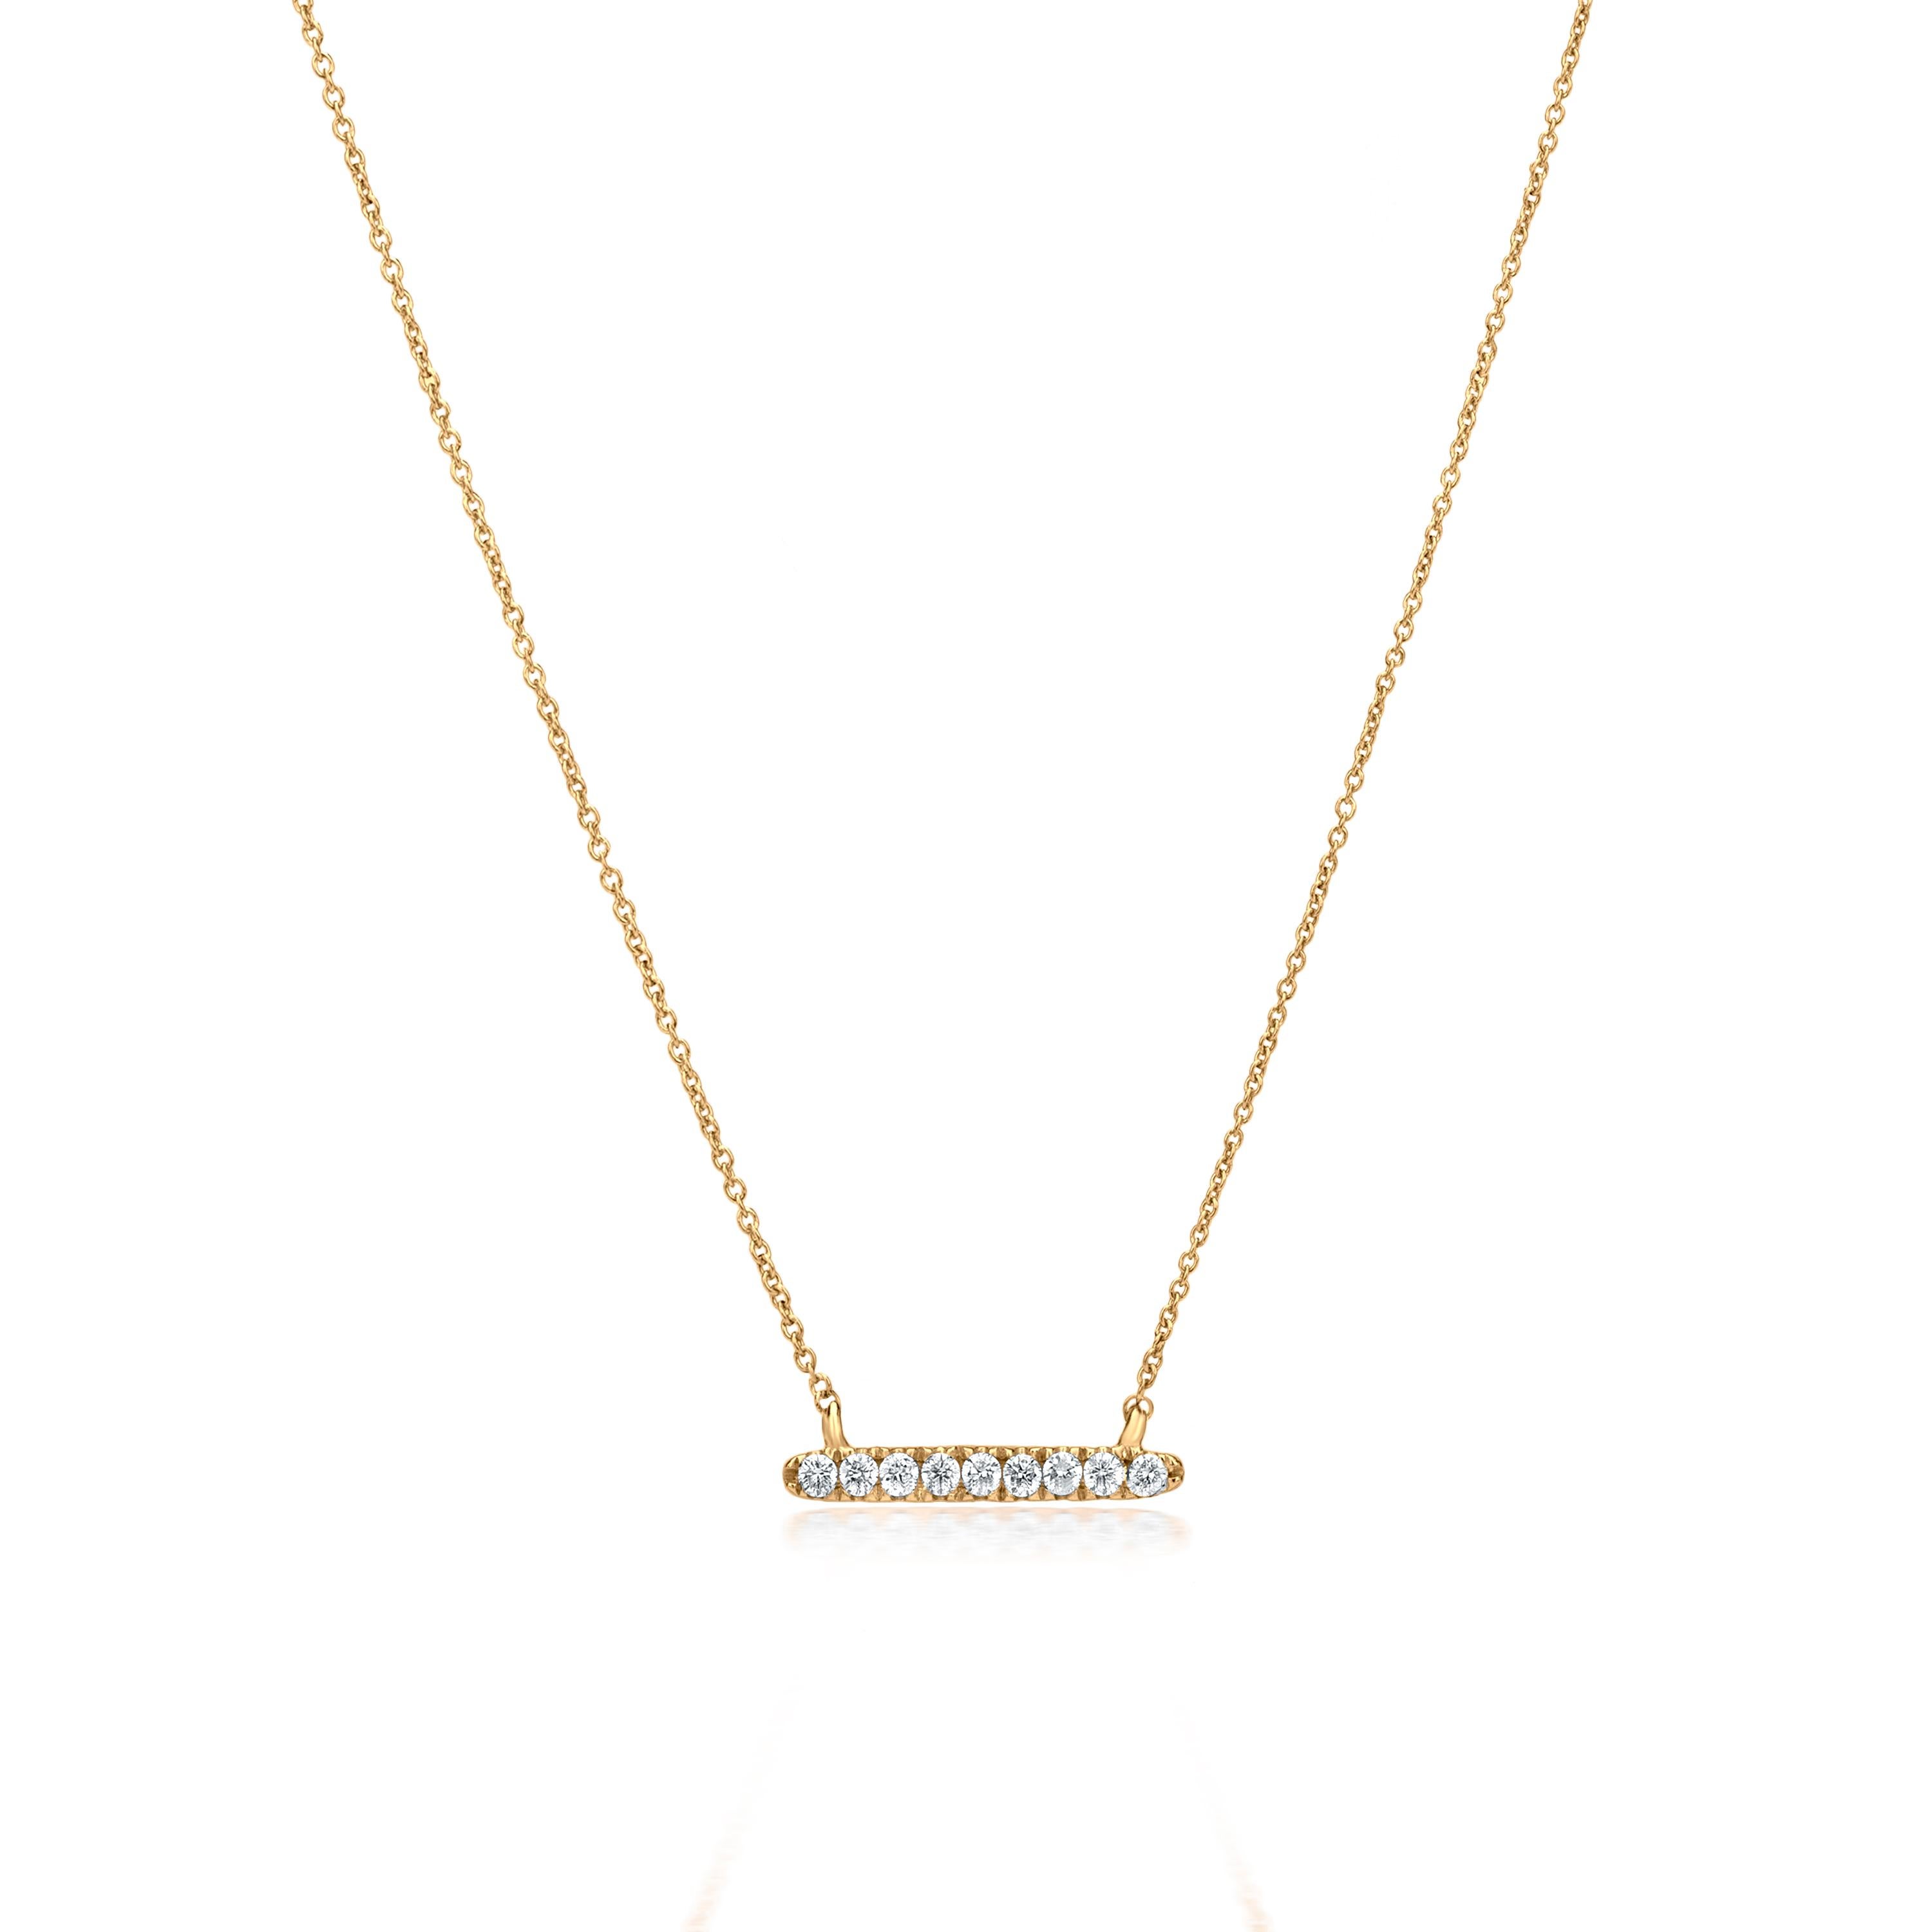 Subtle yet pretty this Luxle bar pendant necklace is the new fashion statement. It is featured with 9 round cut diamonds, totaling 0.11Cts adorned in an adorable motif of a bar. The pendant is stationed across an elegant cable chain with a hanging